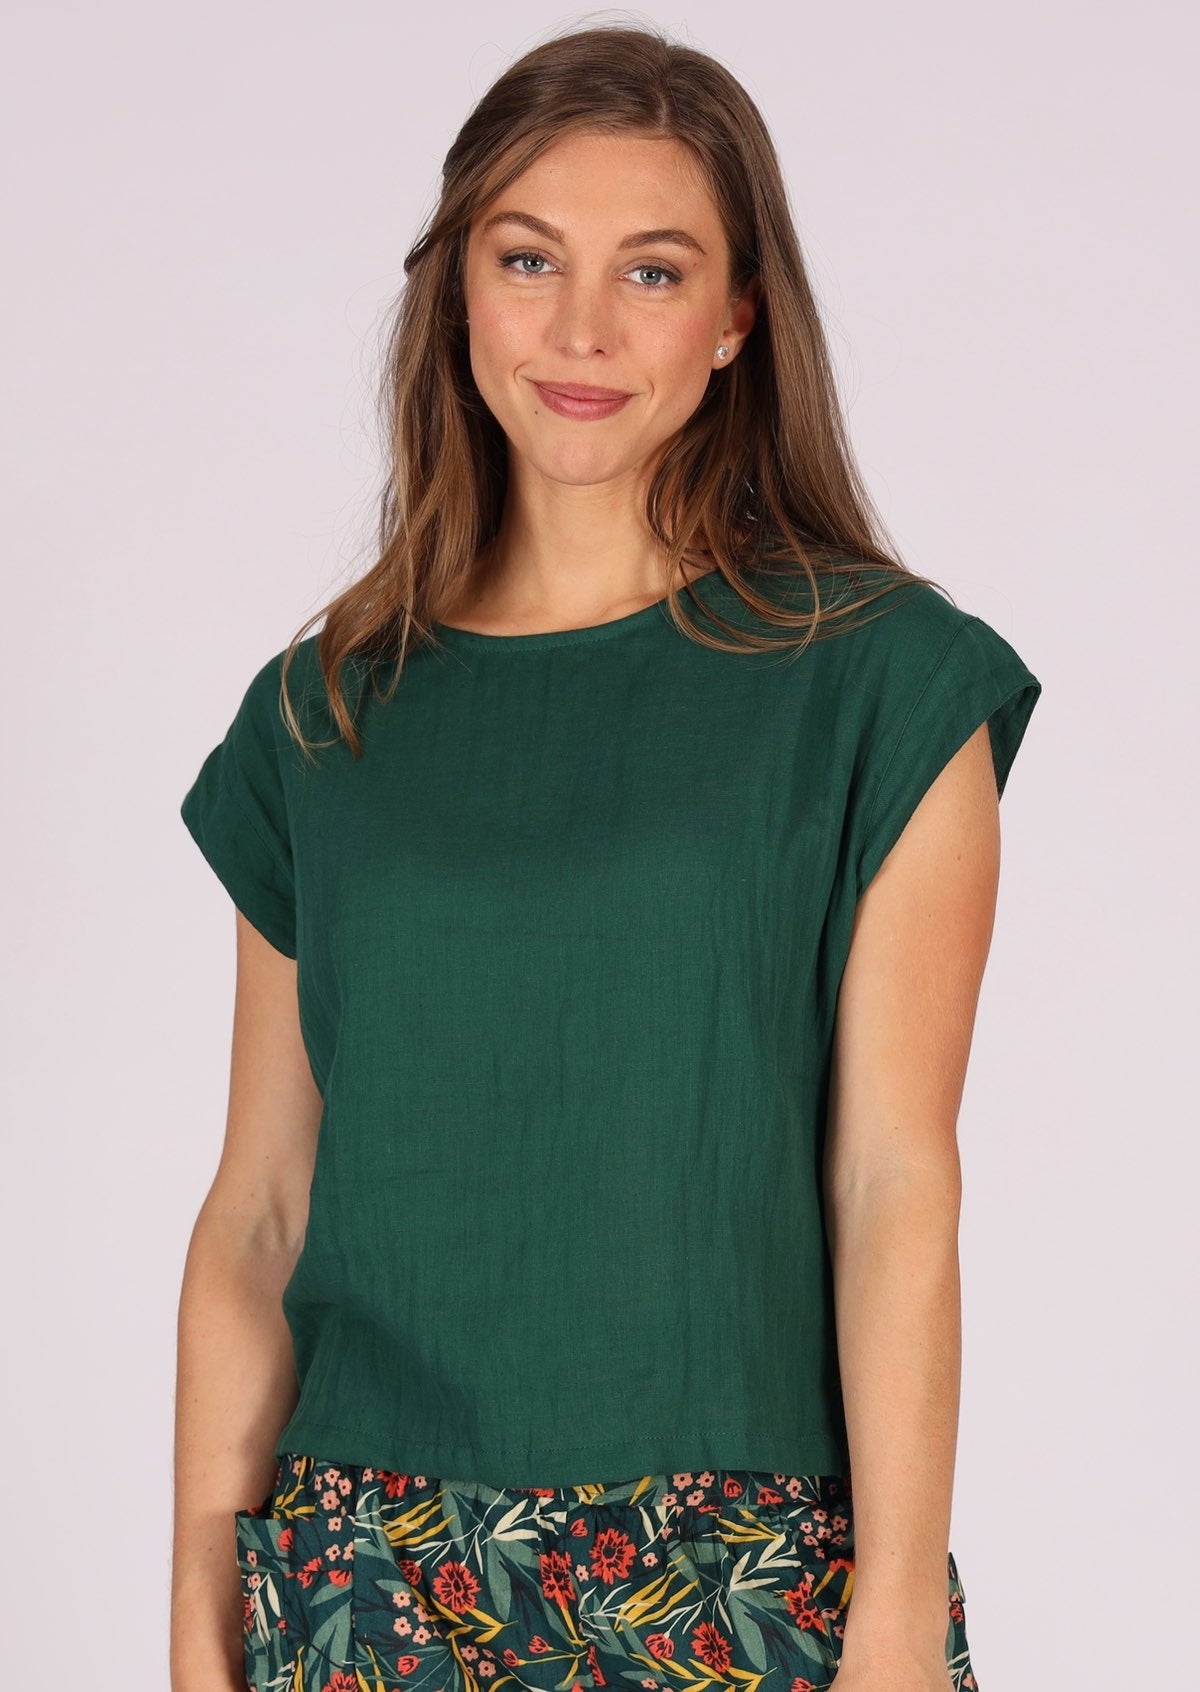 Hip length cotton top with cap sleeves